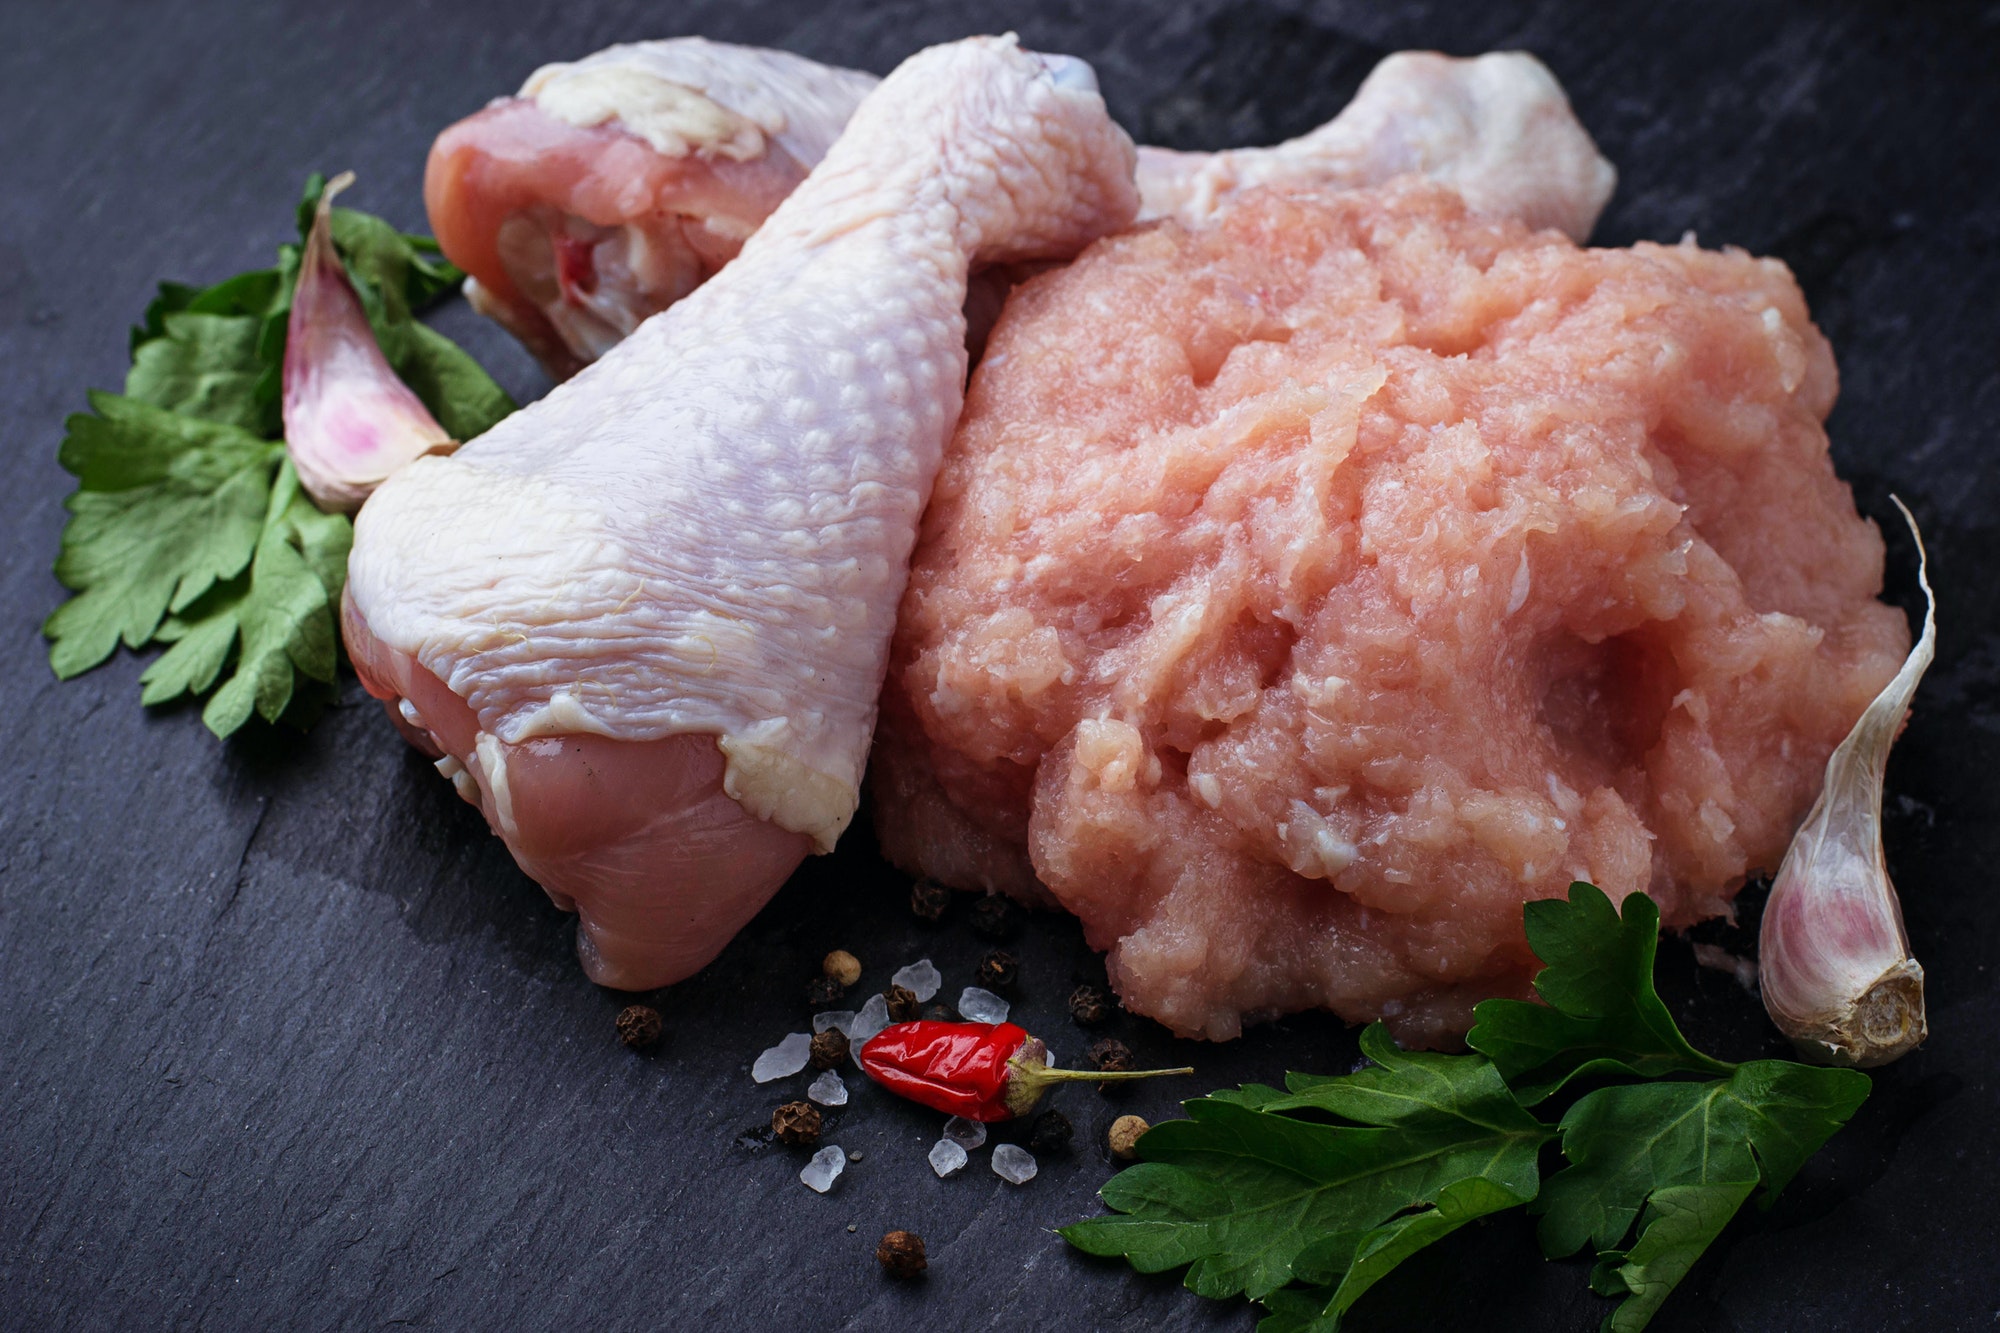 Raw chicken legs and minced meat